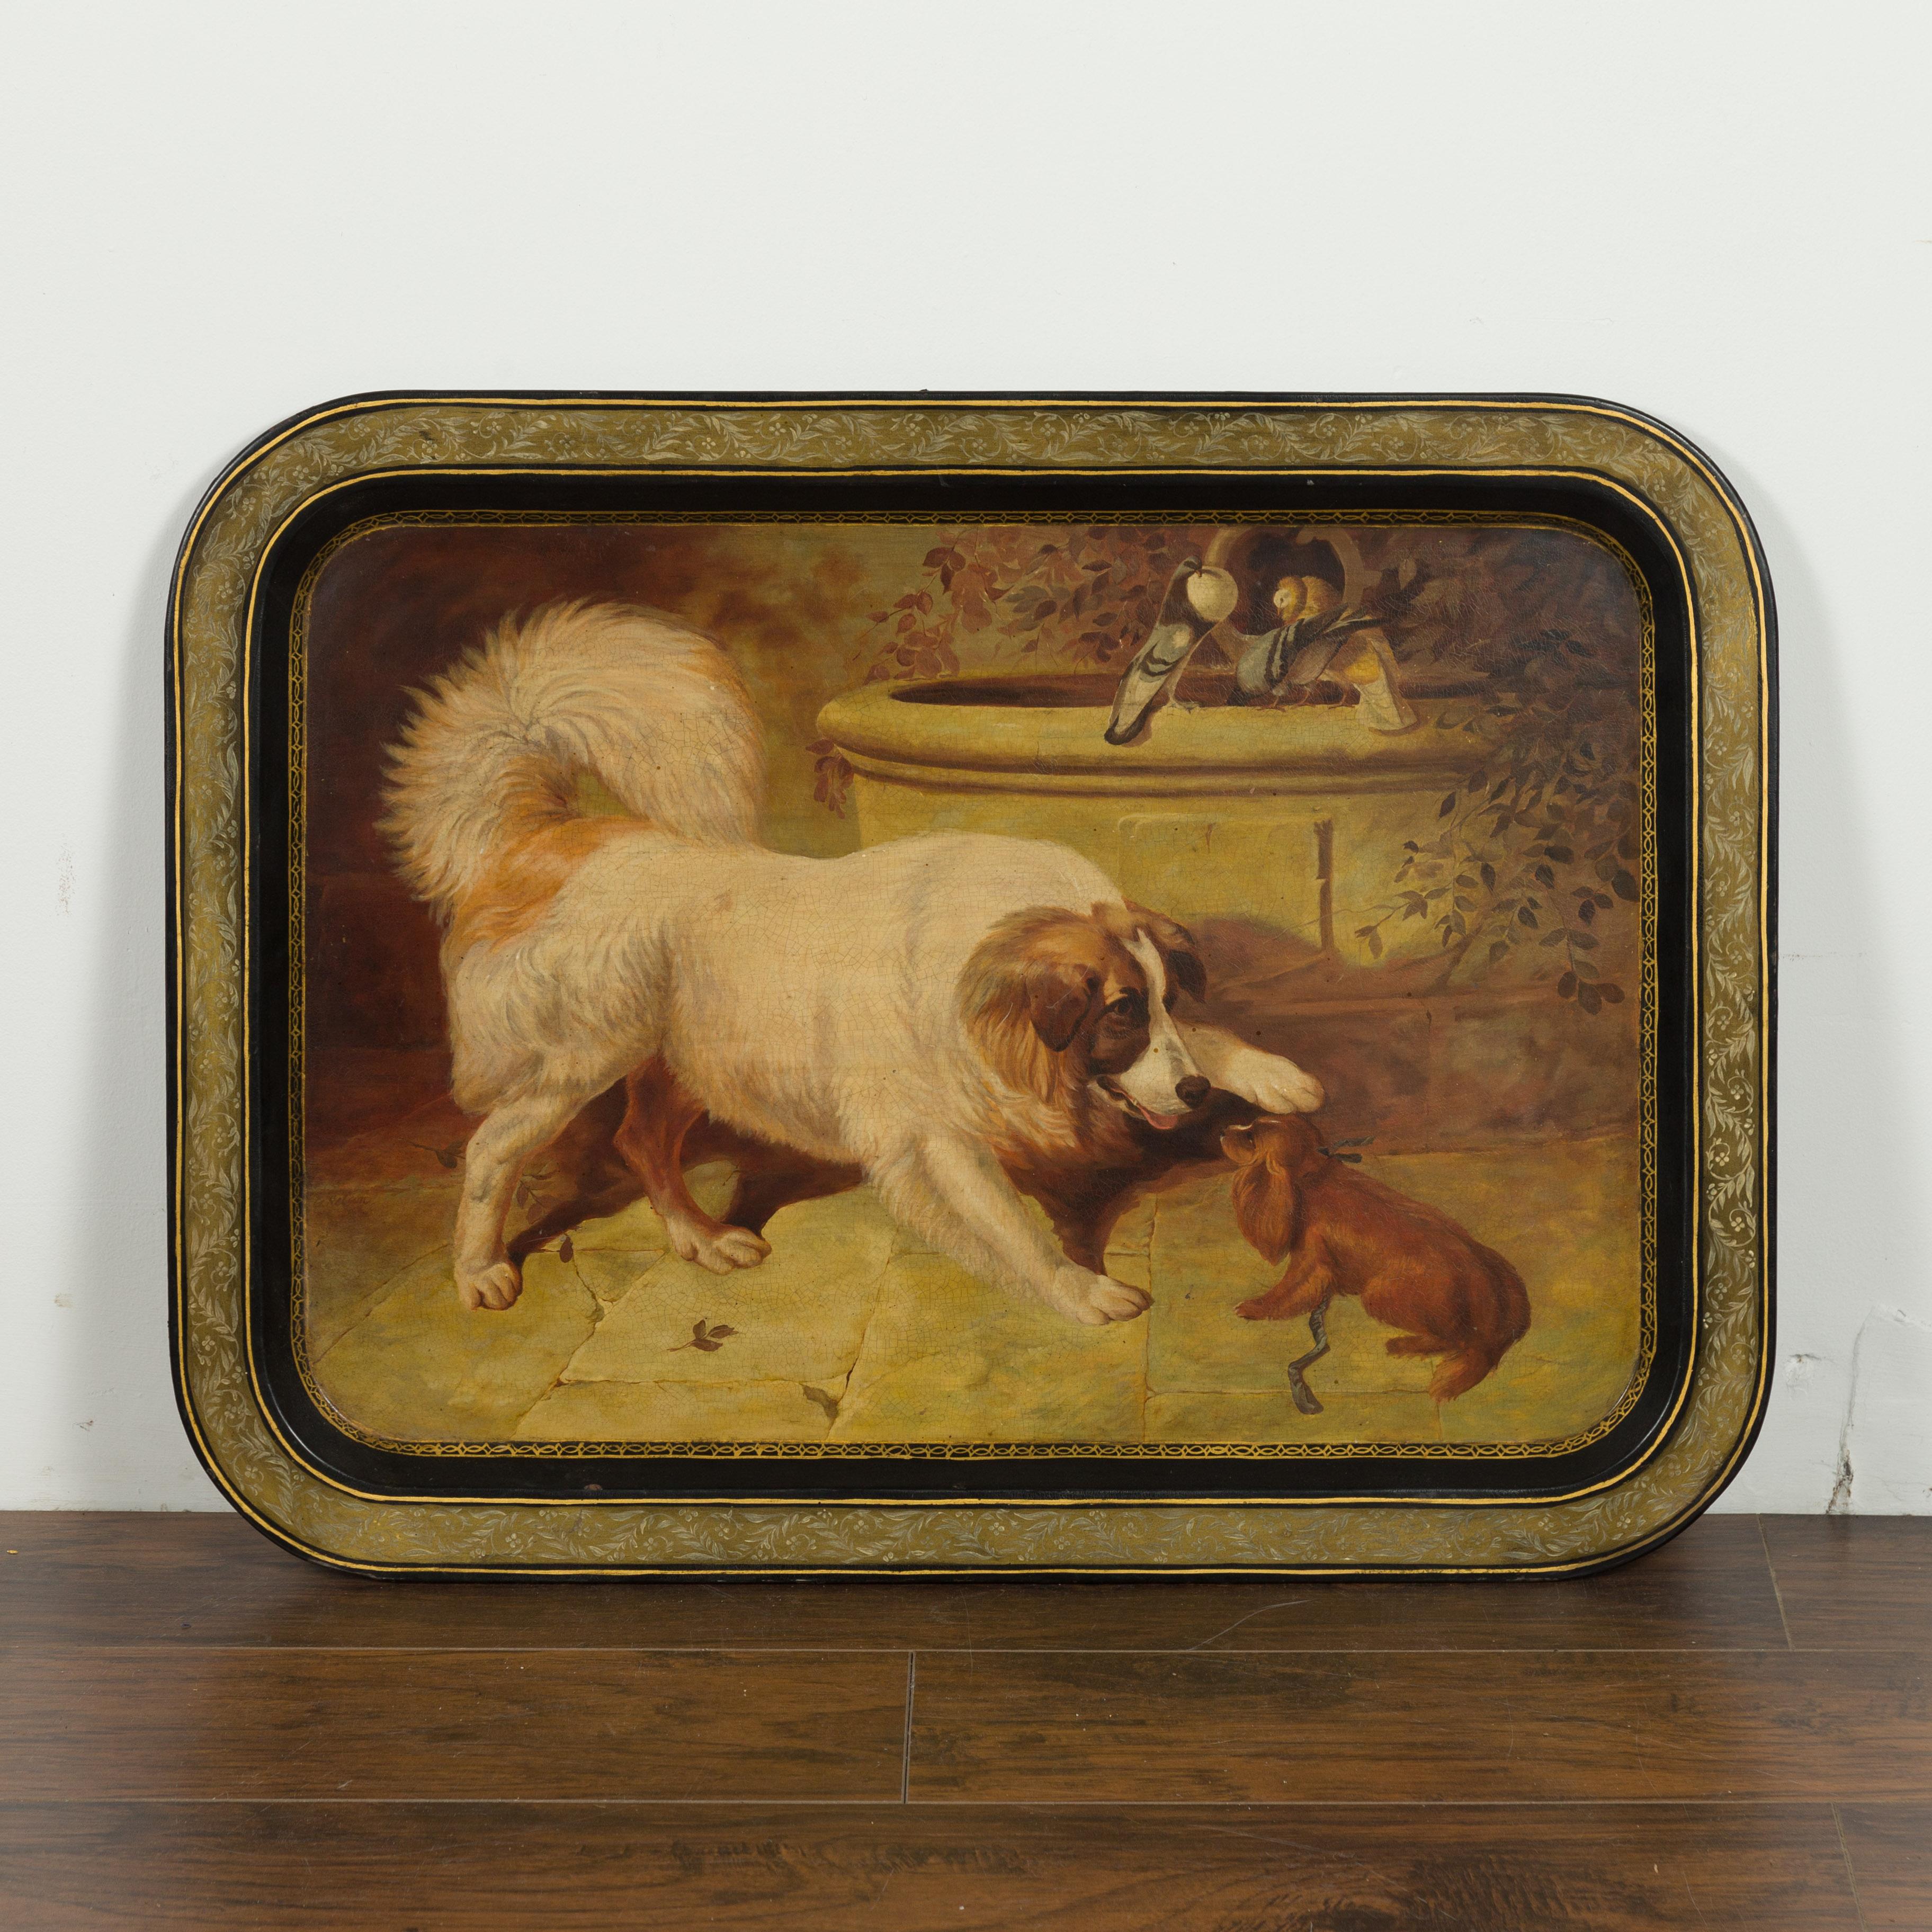 An English painted tôle tray from the 19th century, adorned with dog motifs. Created in England during the 19th century, this tray draws our attention with its skillful depiction of two dogs (a large and a small one) playing with one another in